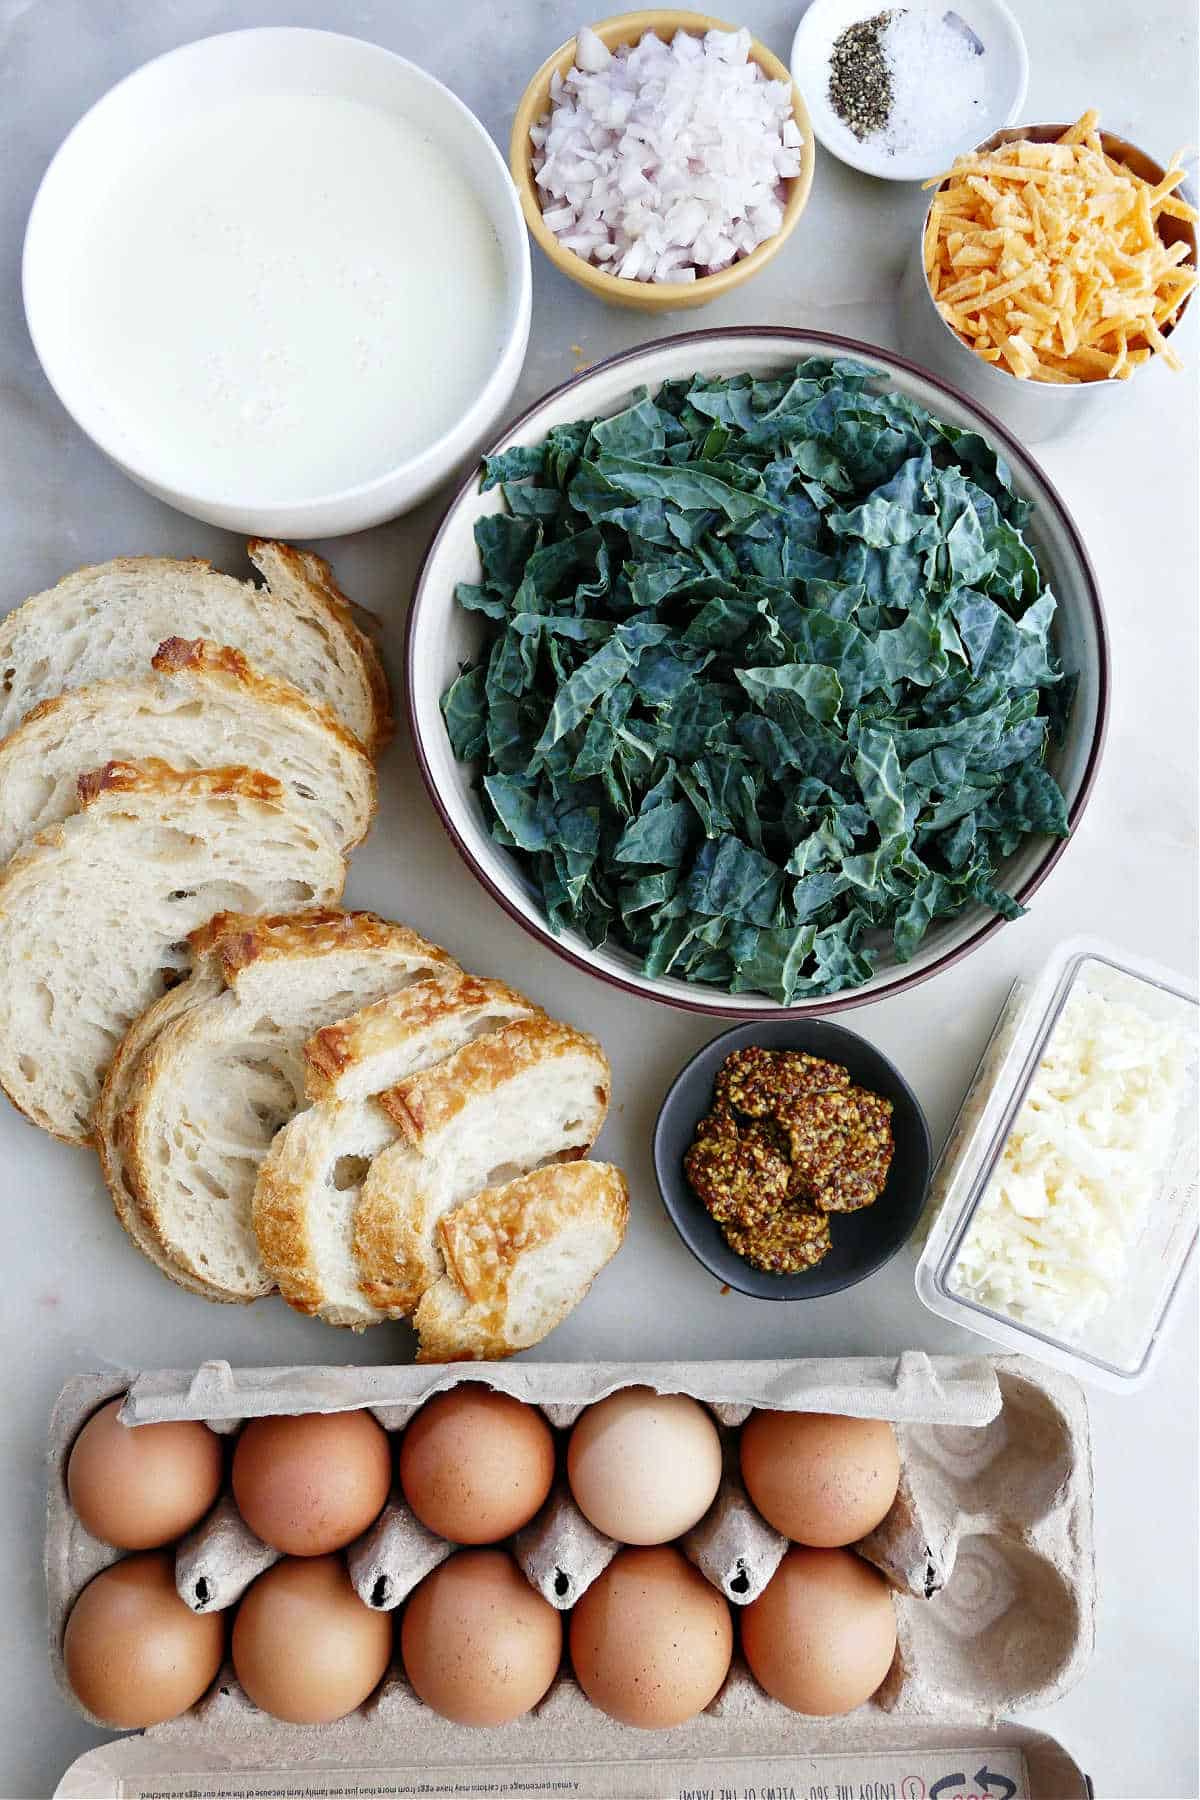 kale in a skillet next to bread cubes, cheese, and eggs on a counter